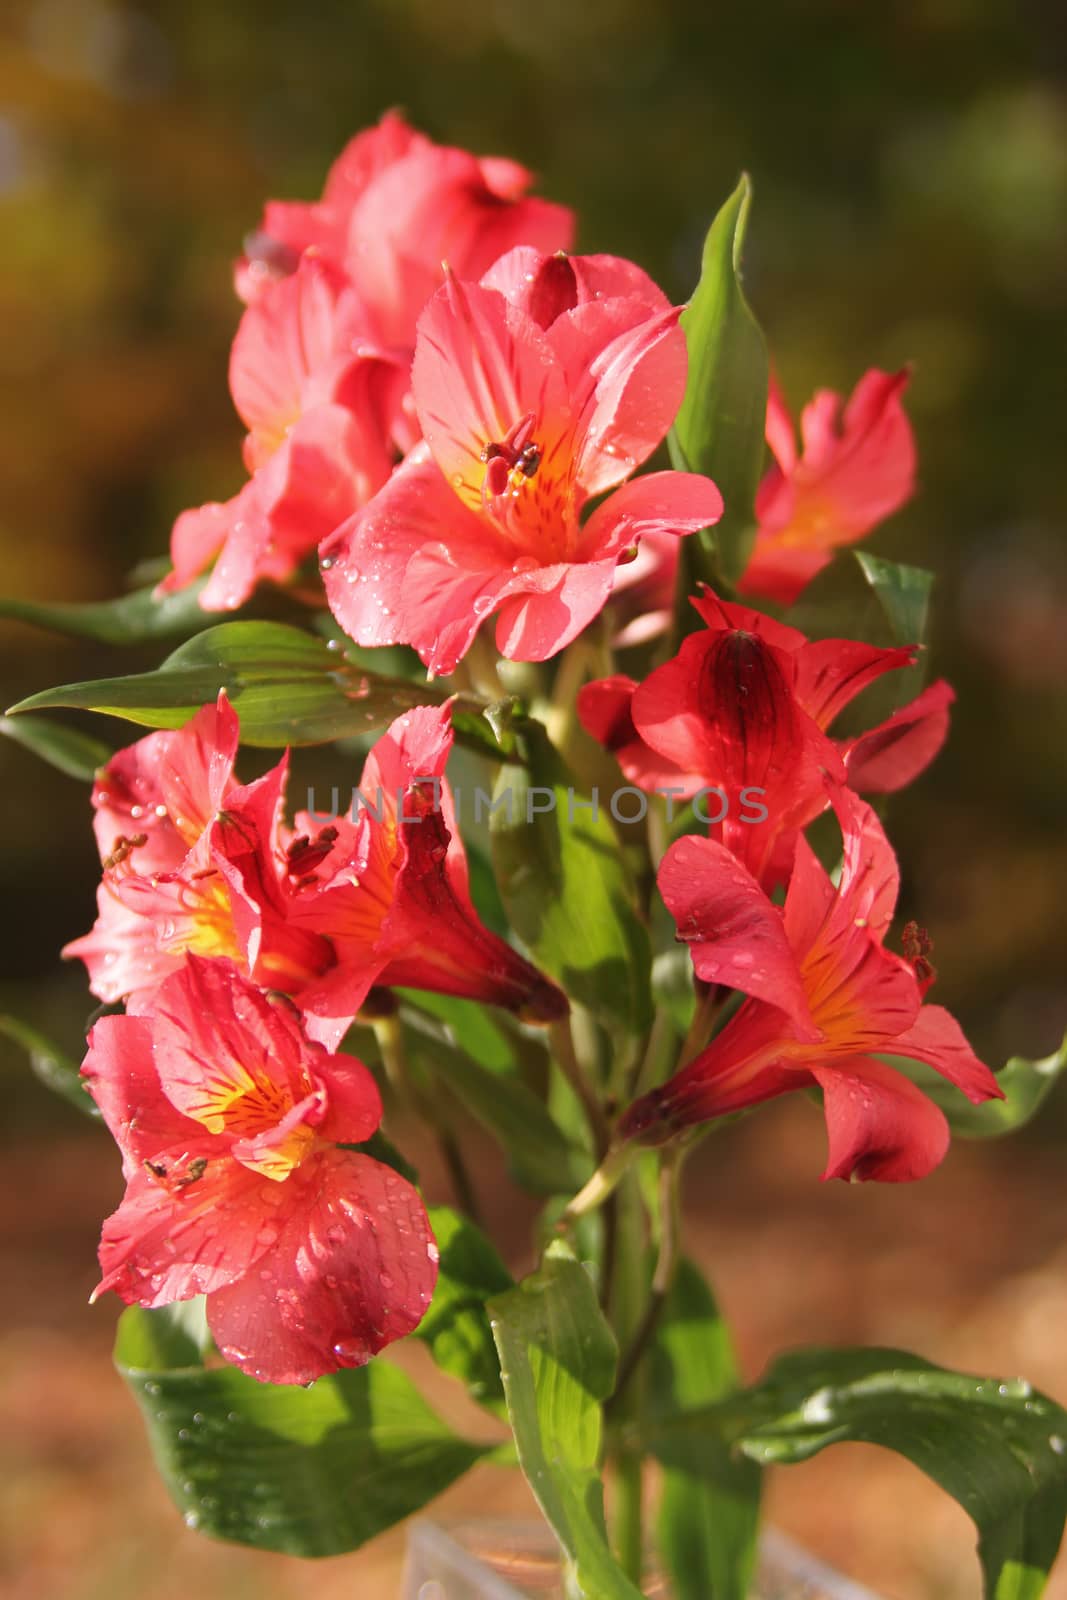 Pink Peruvian Lilies by gvictoria